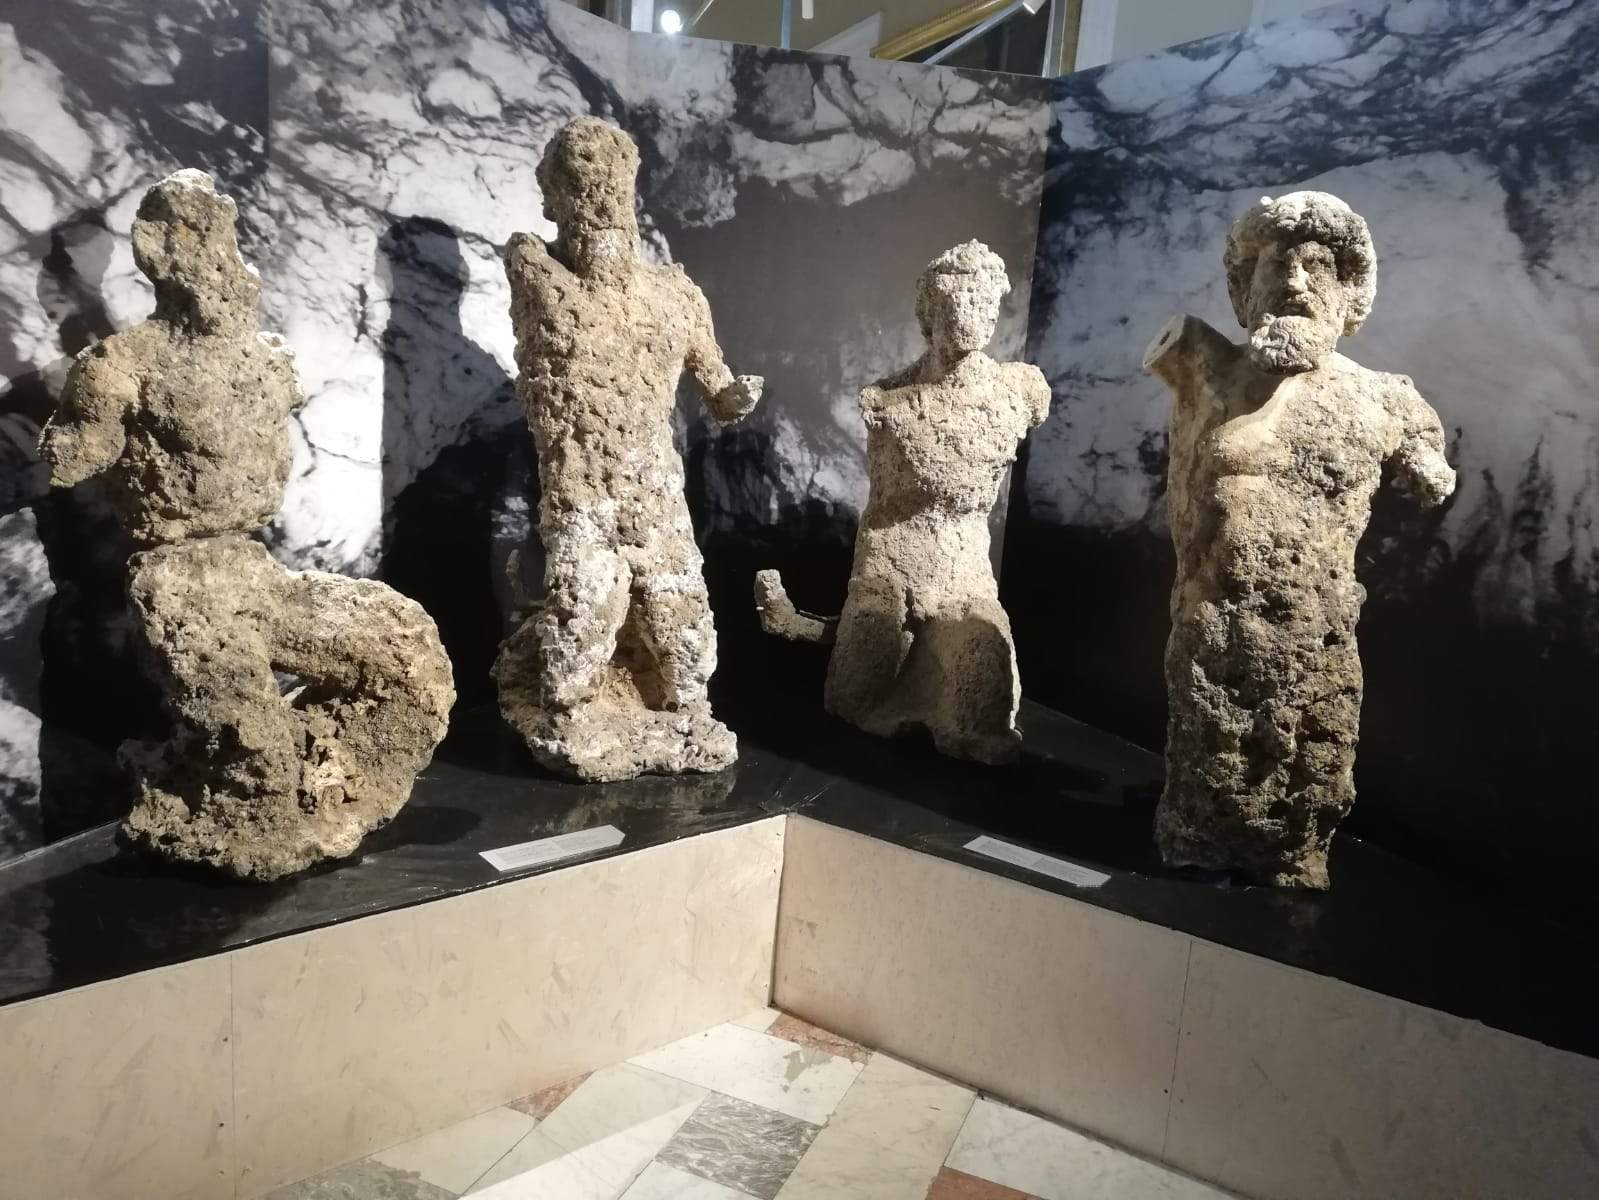 At the MANN in Naples here is Thalassa, a major exhibition on the achievements of underwater archaeology